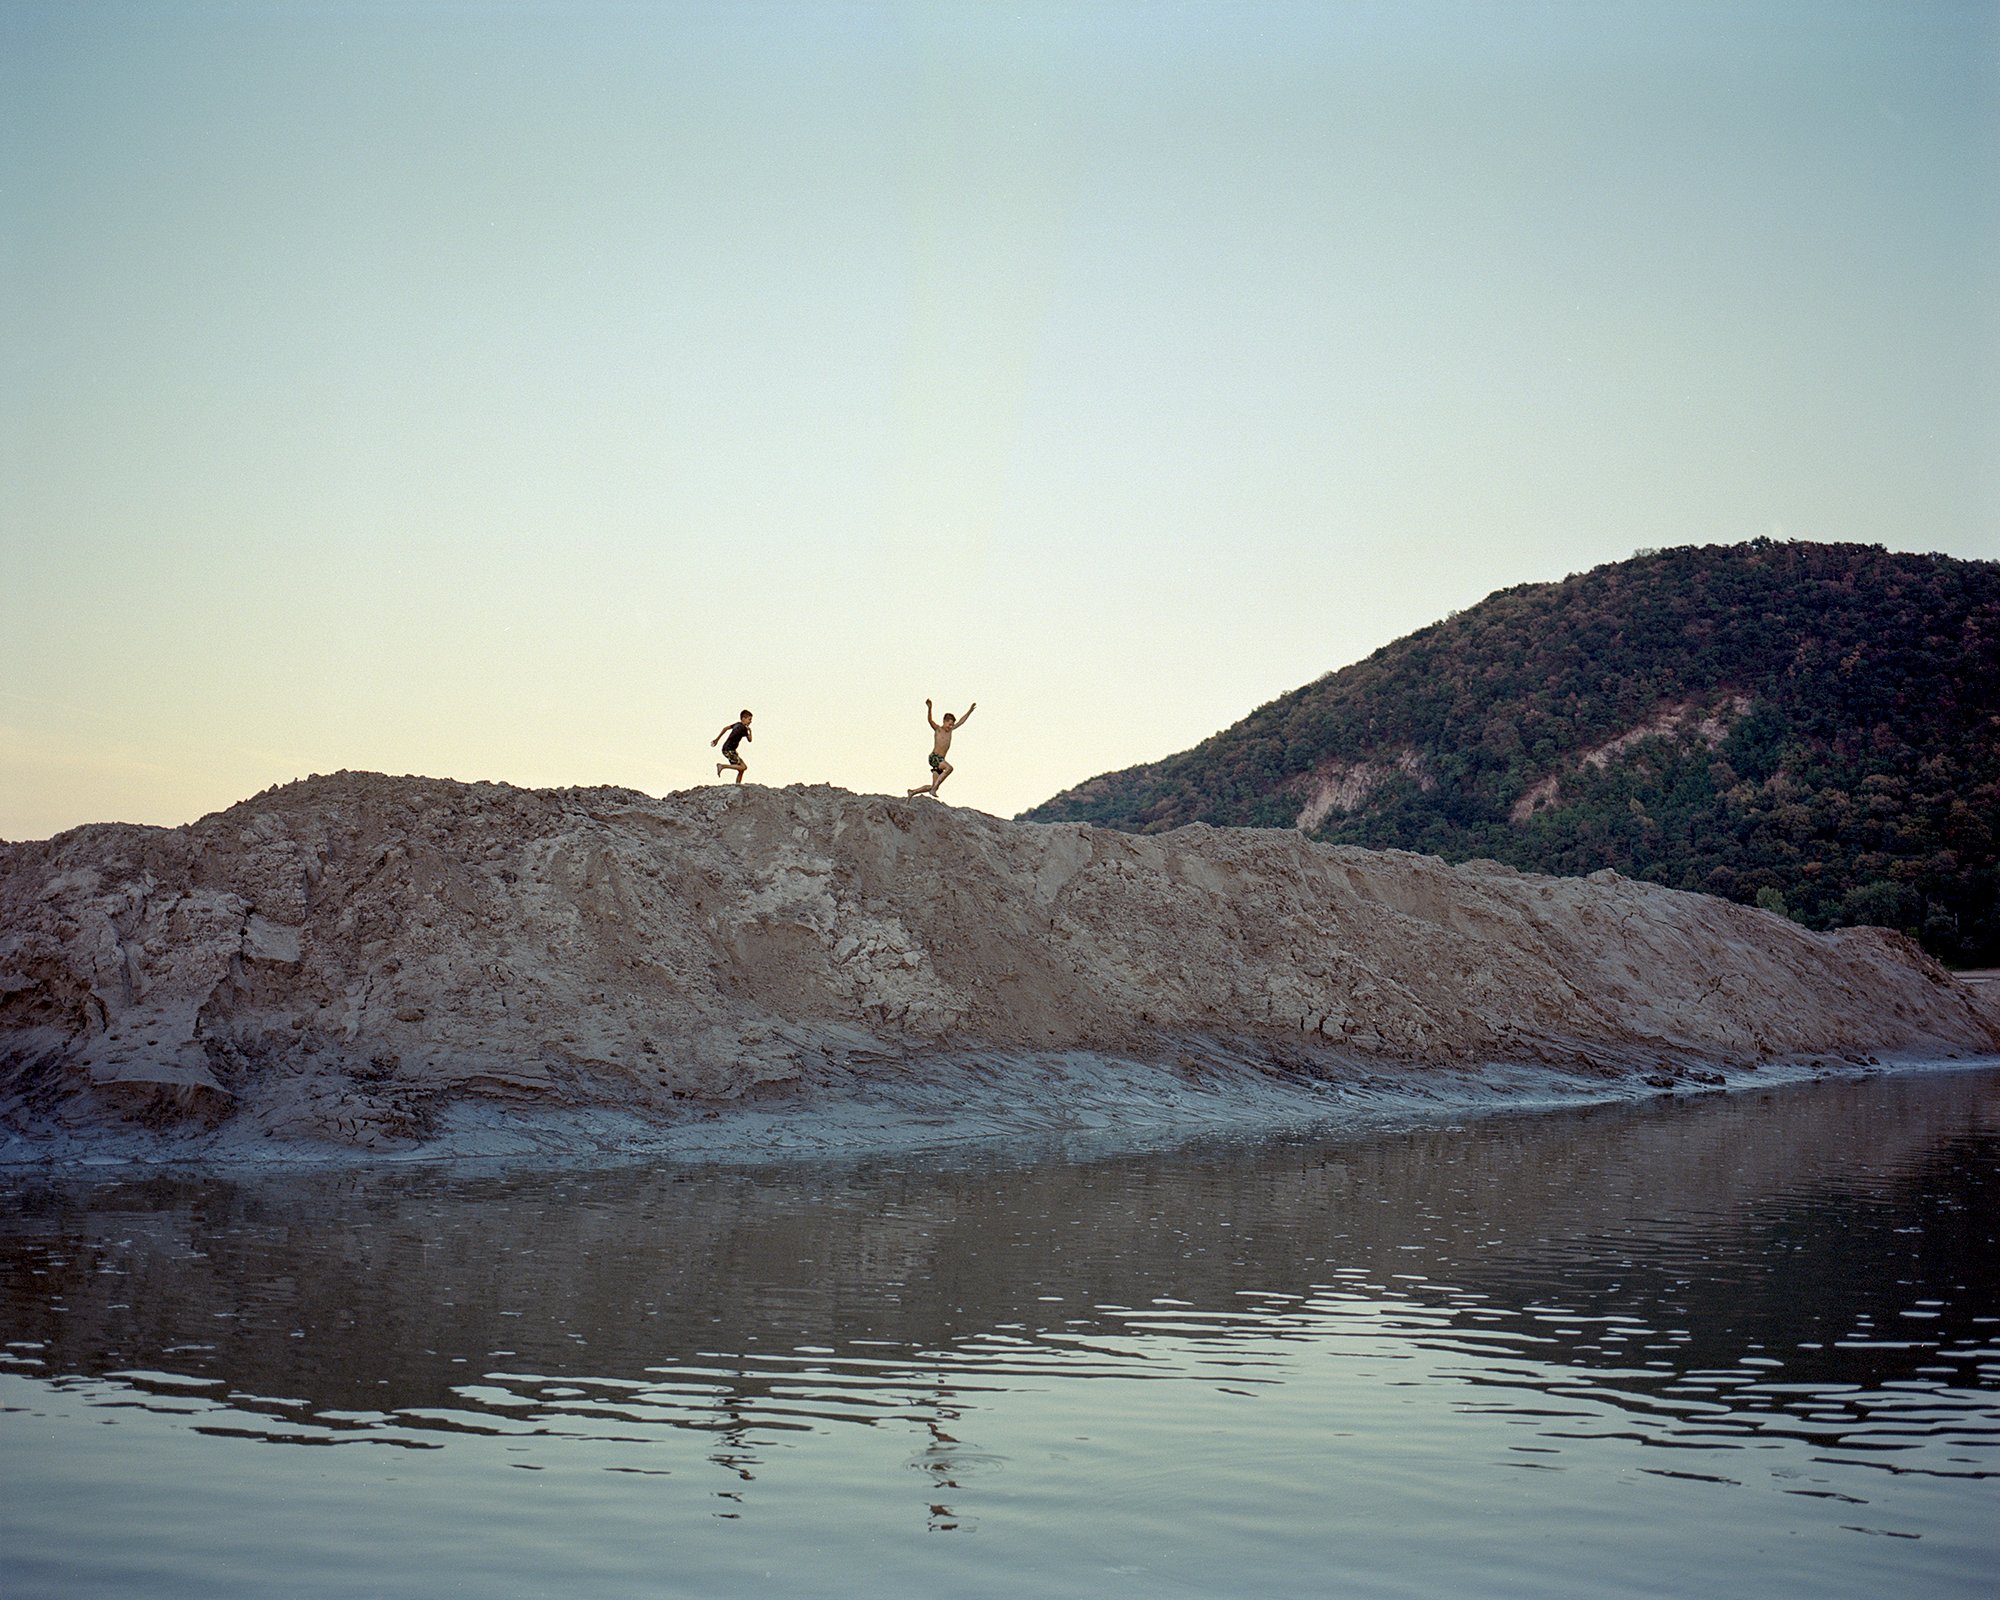  Children jumping from a riverbed dredge at Danube. Nagymaros, Hungary, 2022 